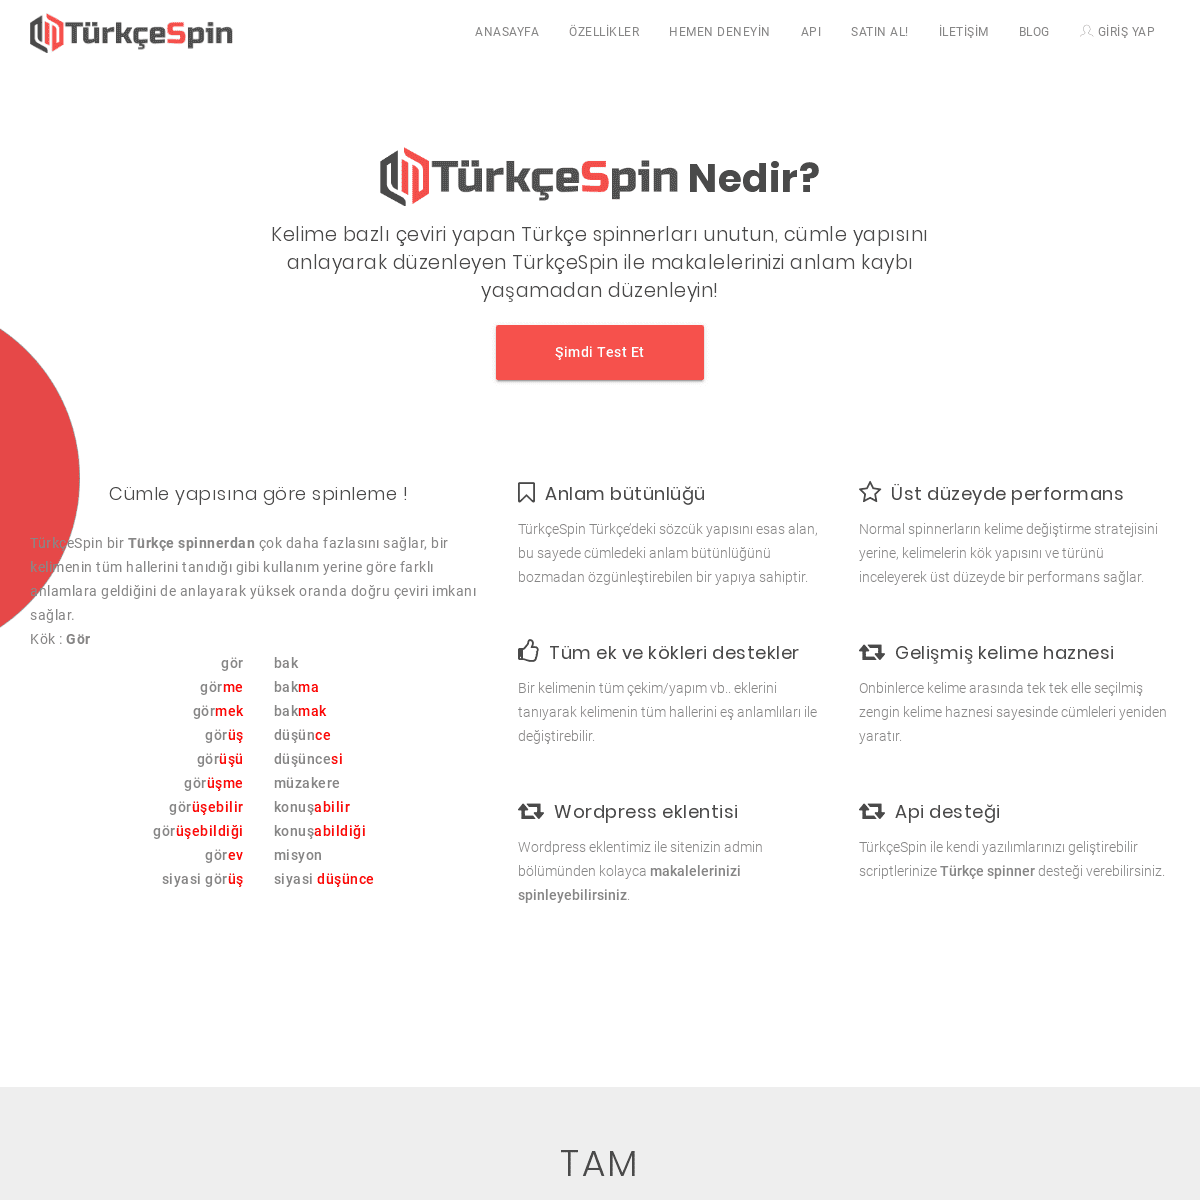 A complete backup of turkcespin.com